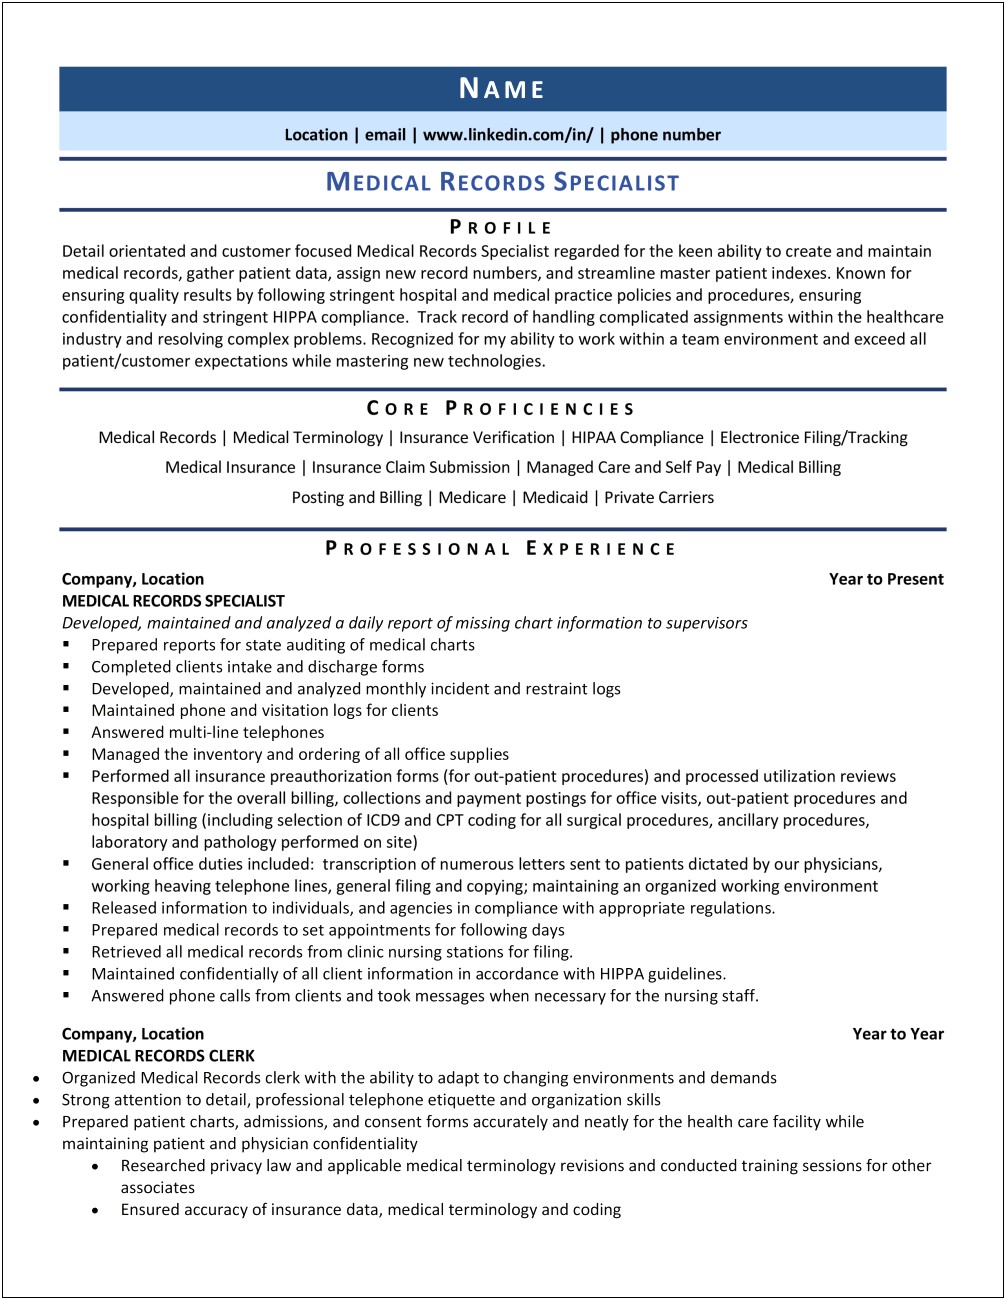 Resume For Records Specialist Professional Summary